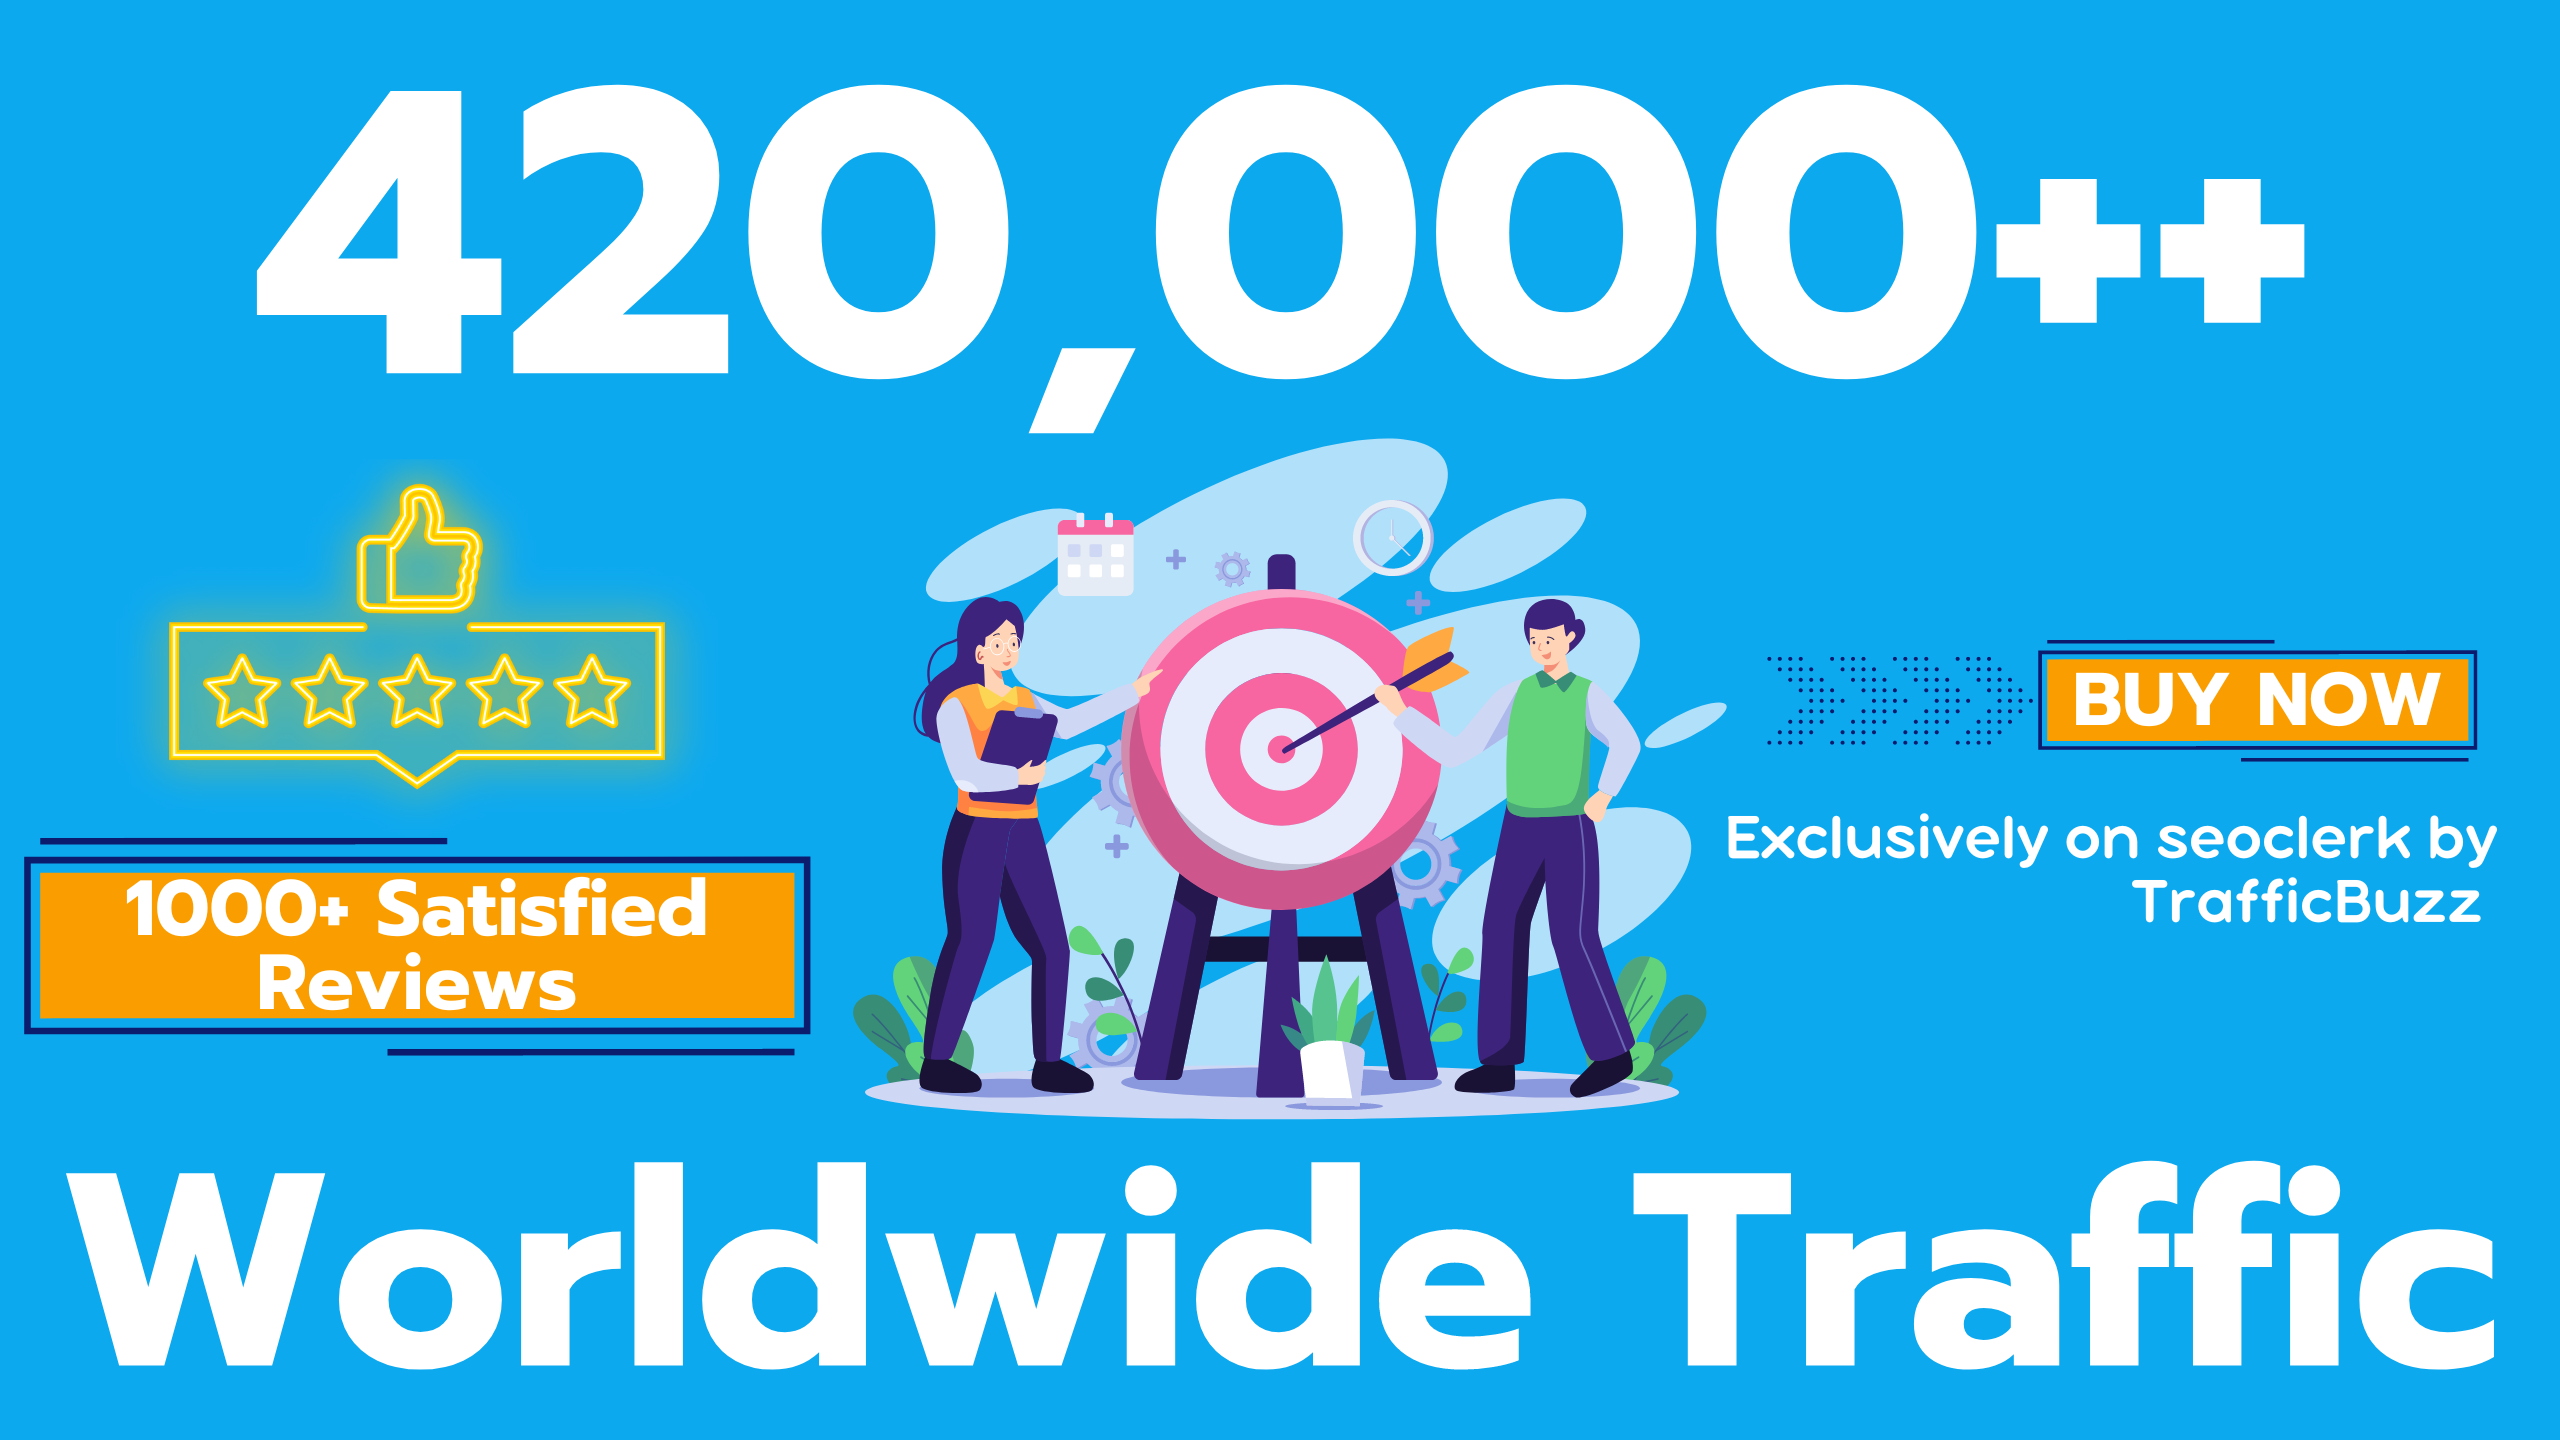 Drive 420,000++ Targeted Human Traffic from search engine and social media